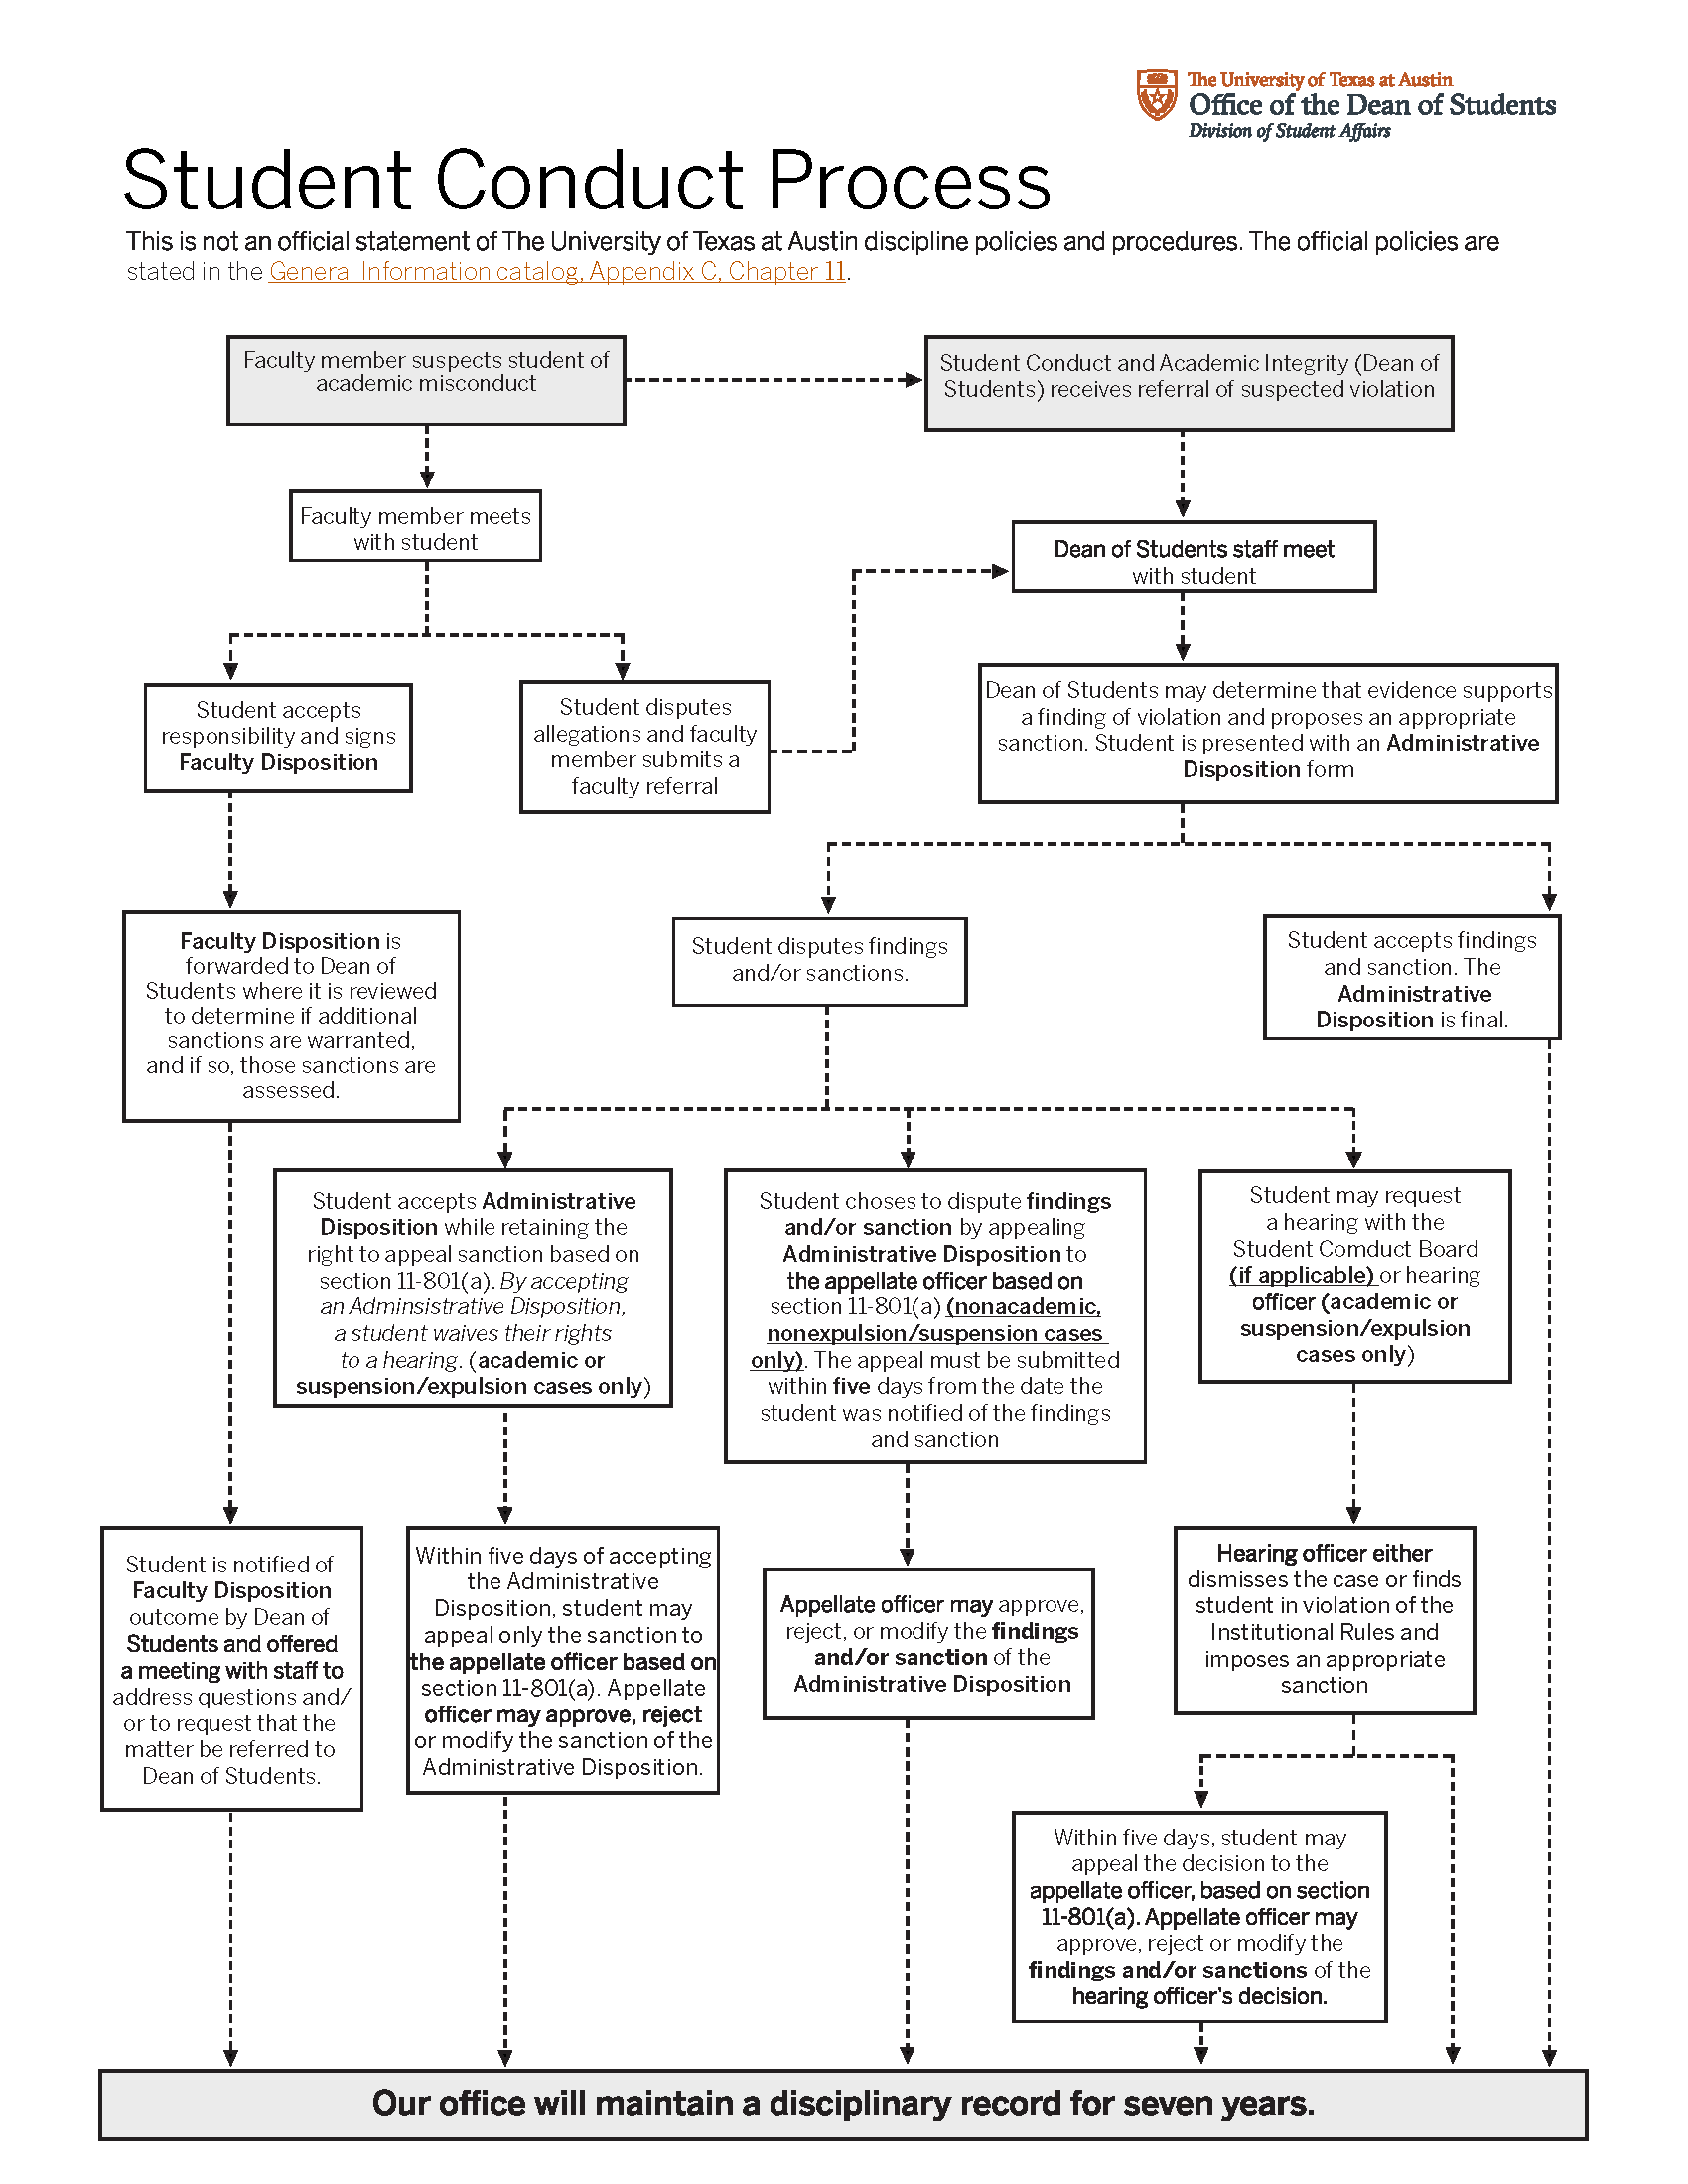 click on this image for a pdf flowchart of the student conduct process